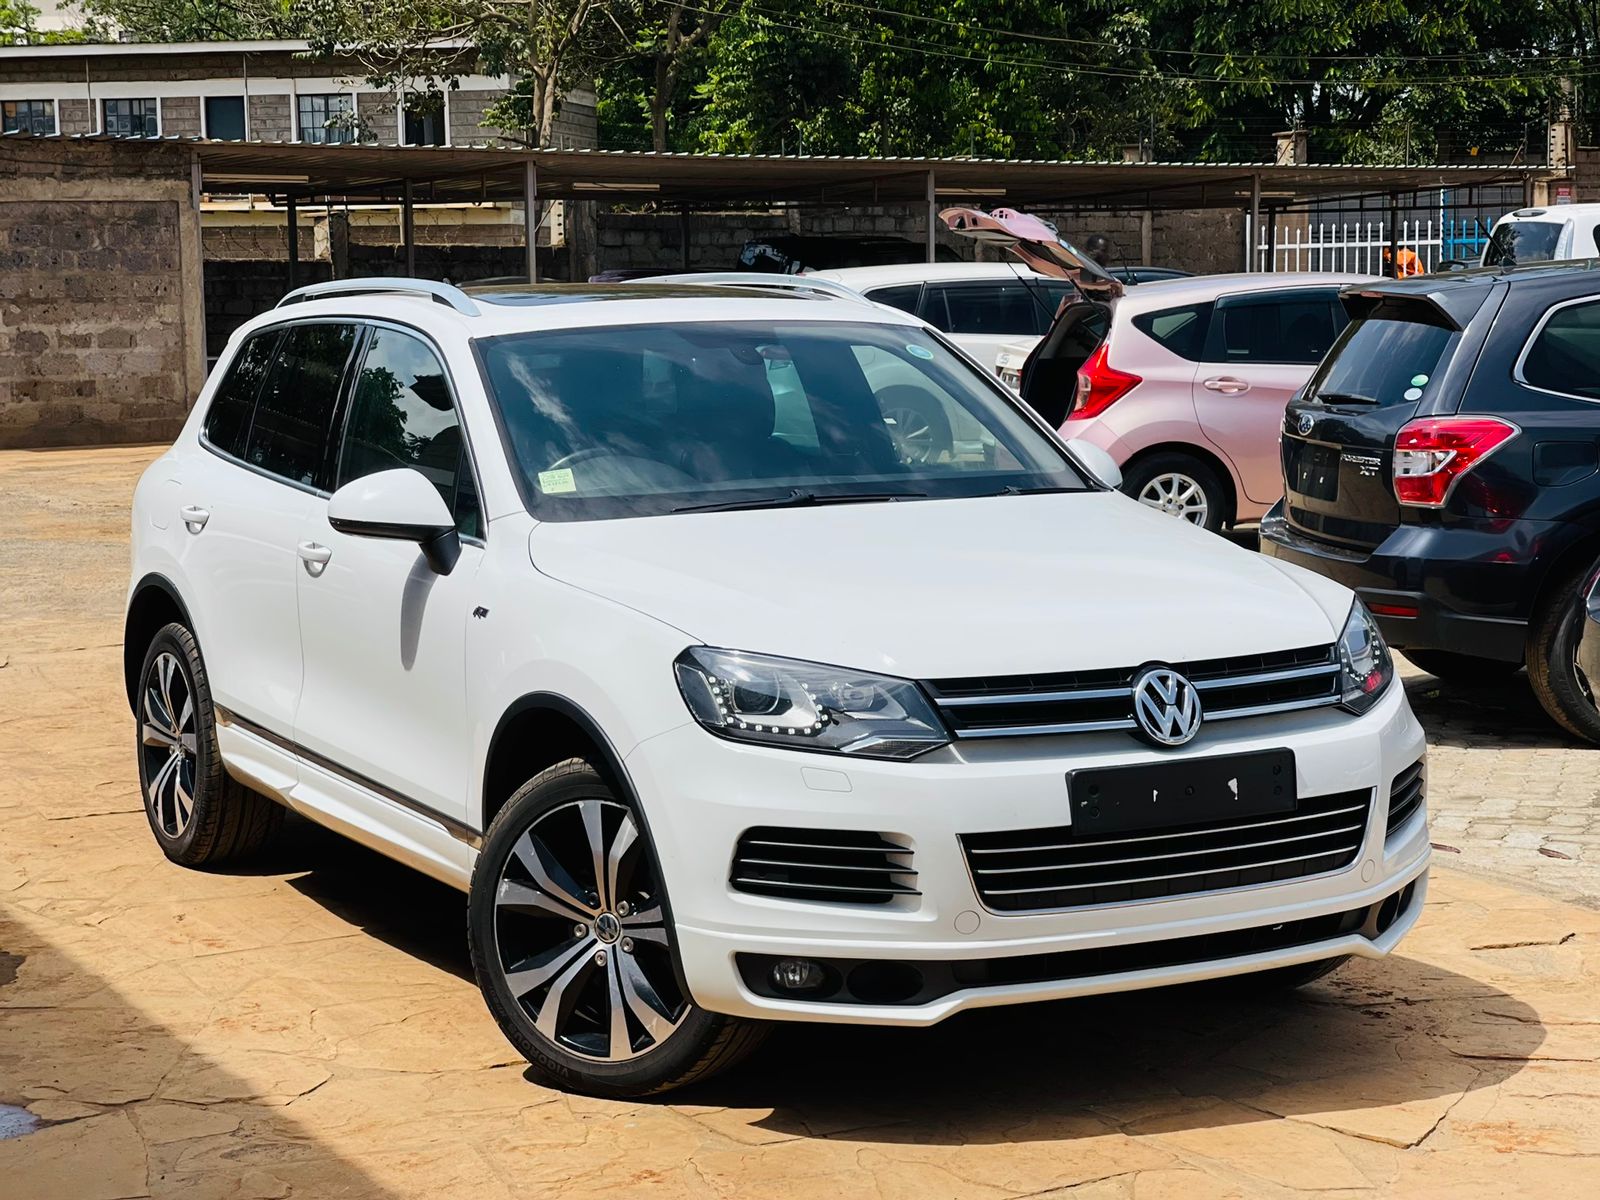 VW TOUAREG R-LINE FULLY LOADED 2015 New Cheapest Pay 20%